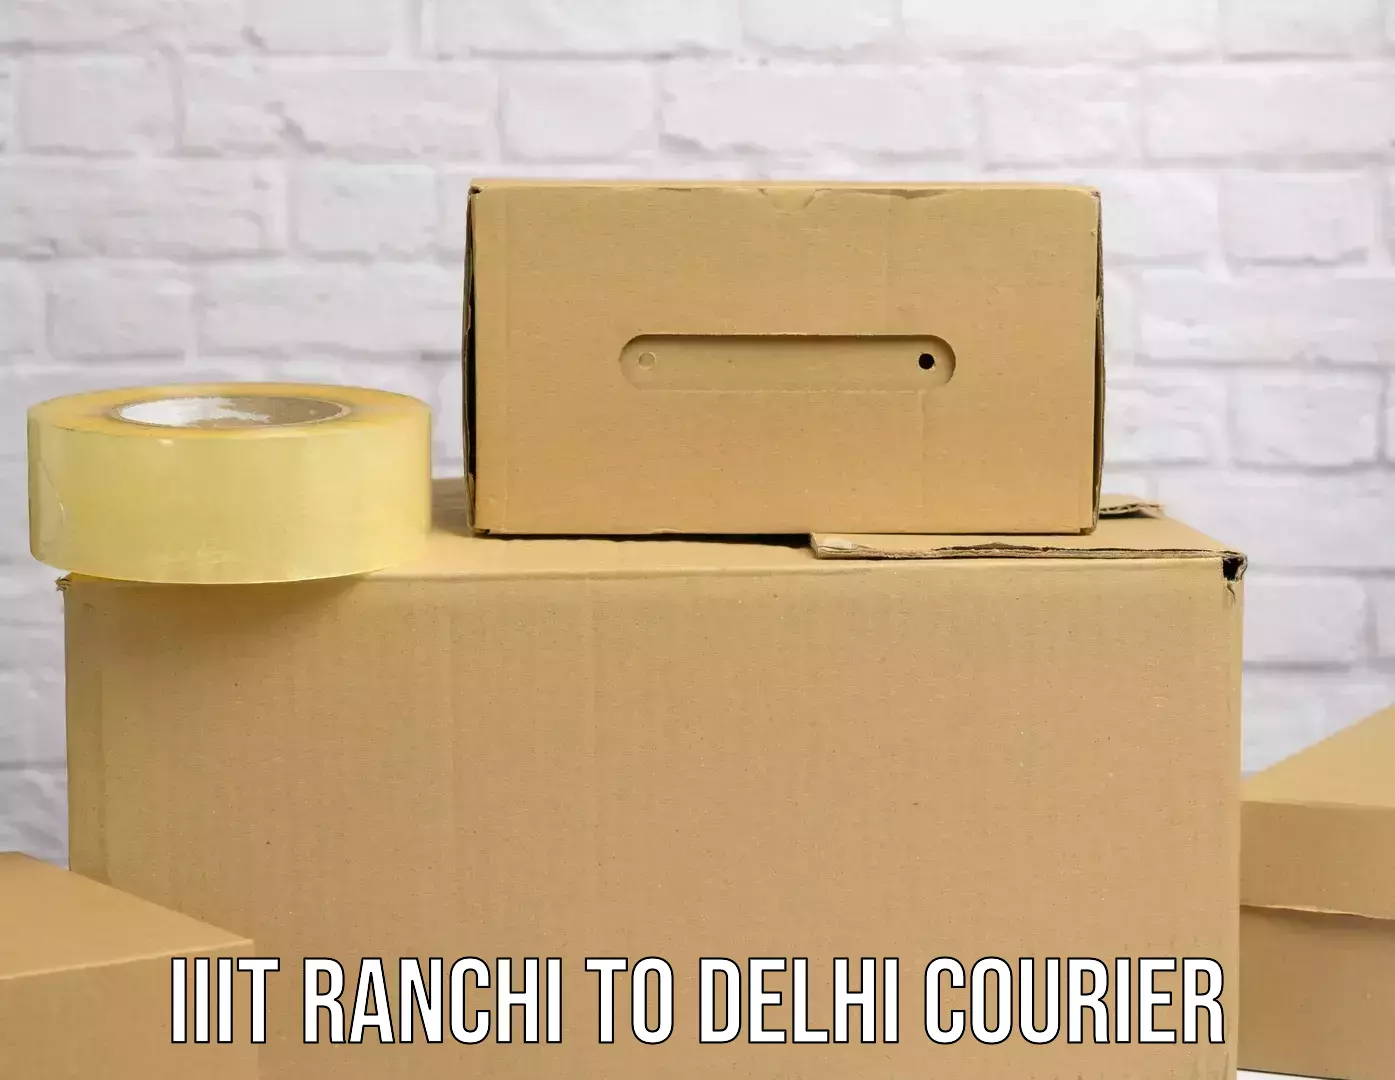 End-to-end delivery IIIT Ranchi to Ramesh Nagar